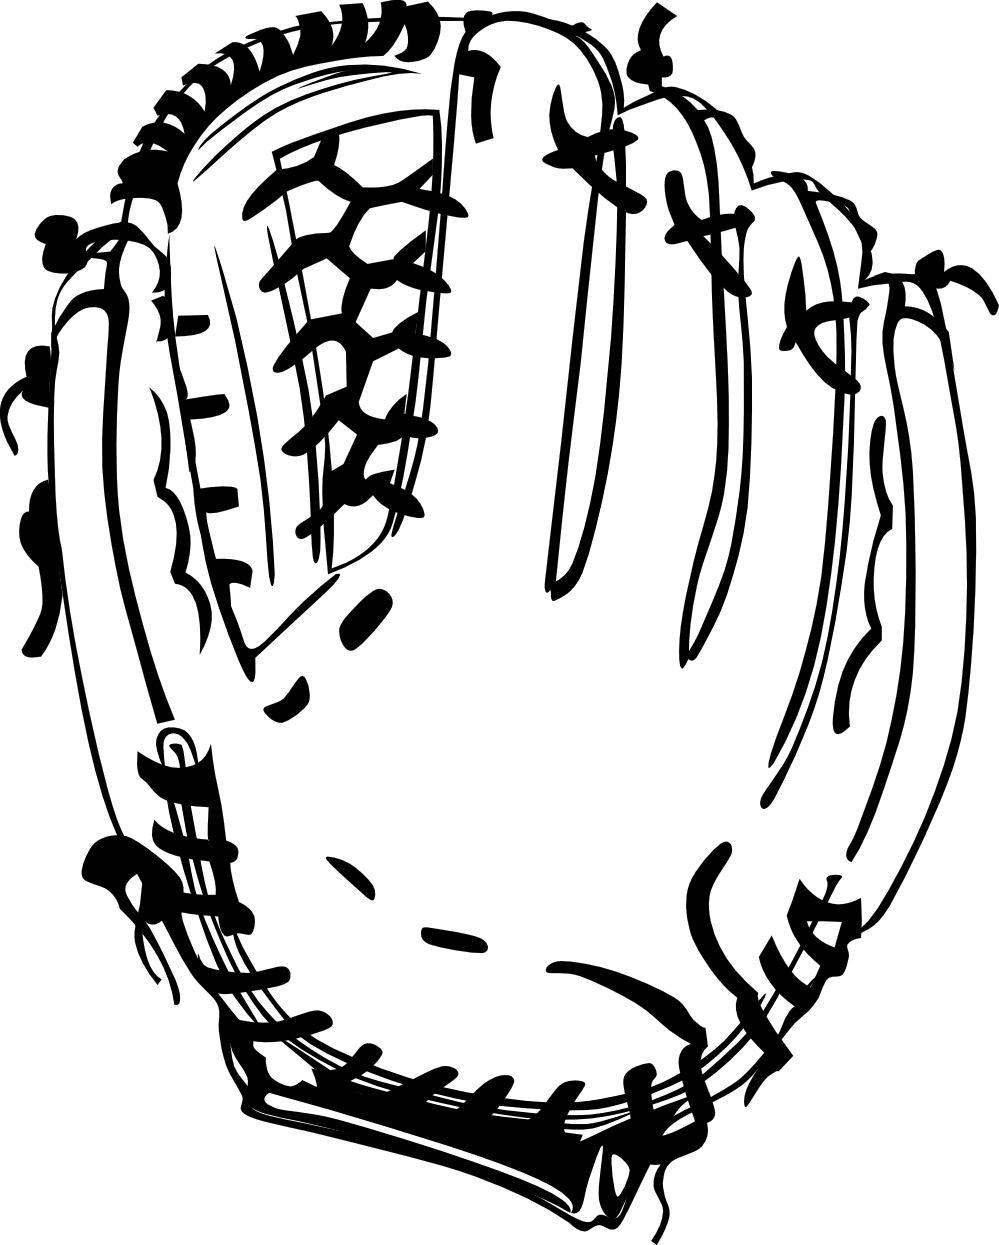 Baseball Glove Clipart Black And White | Clipart library - Free 